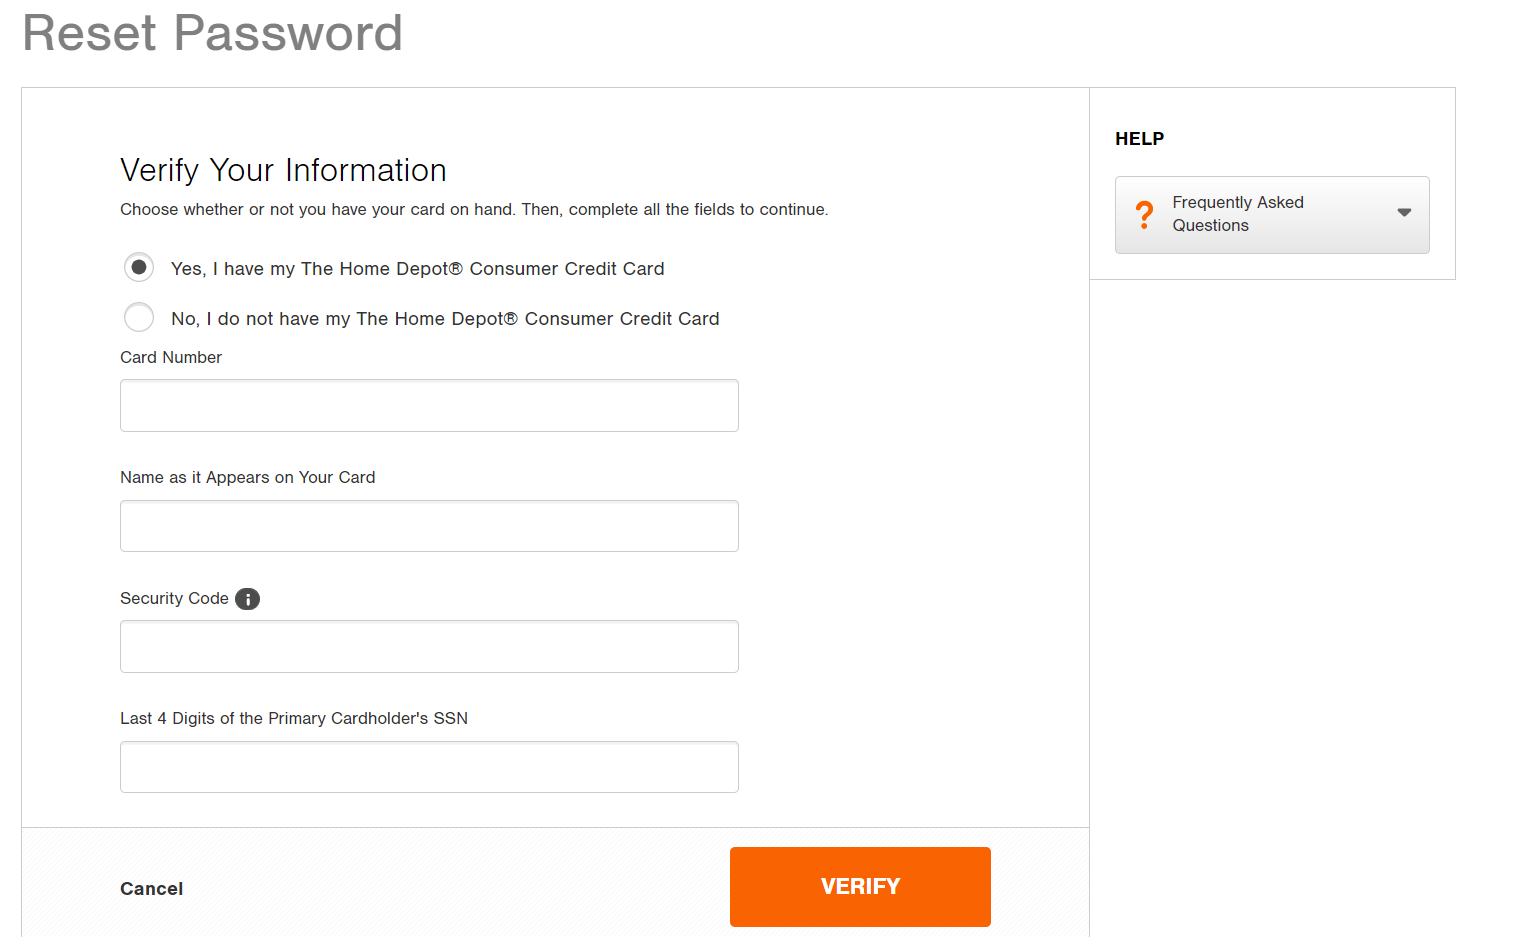 enter required details to reset myhomedepotaccount login password